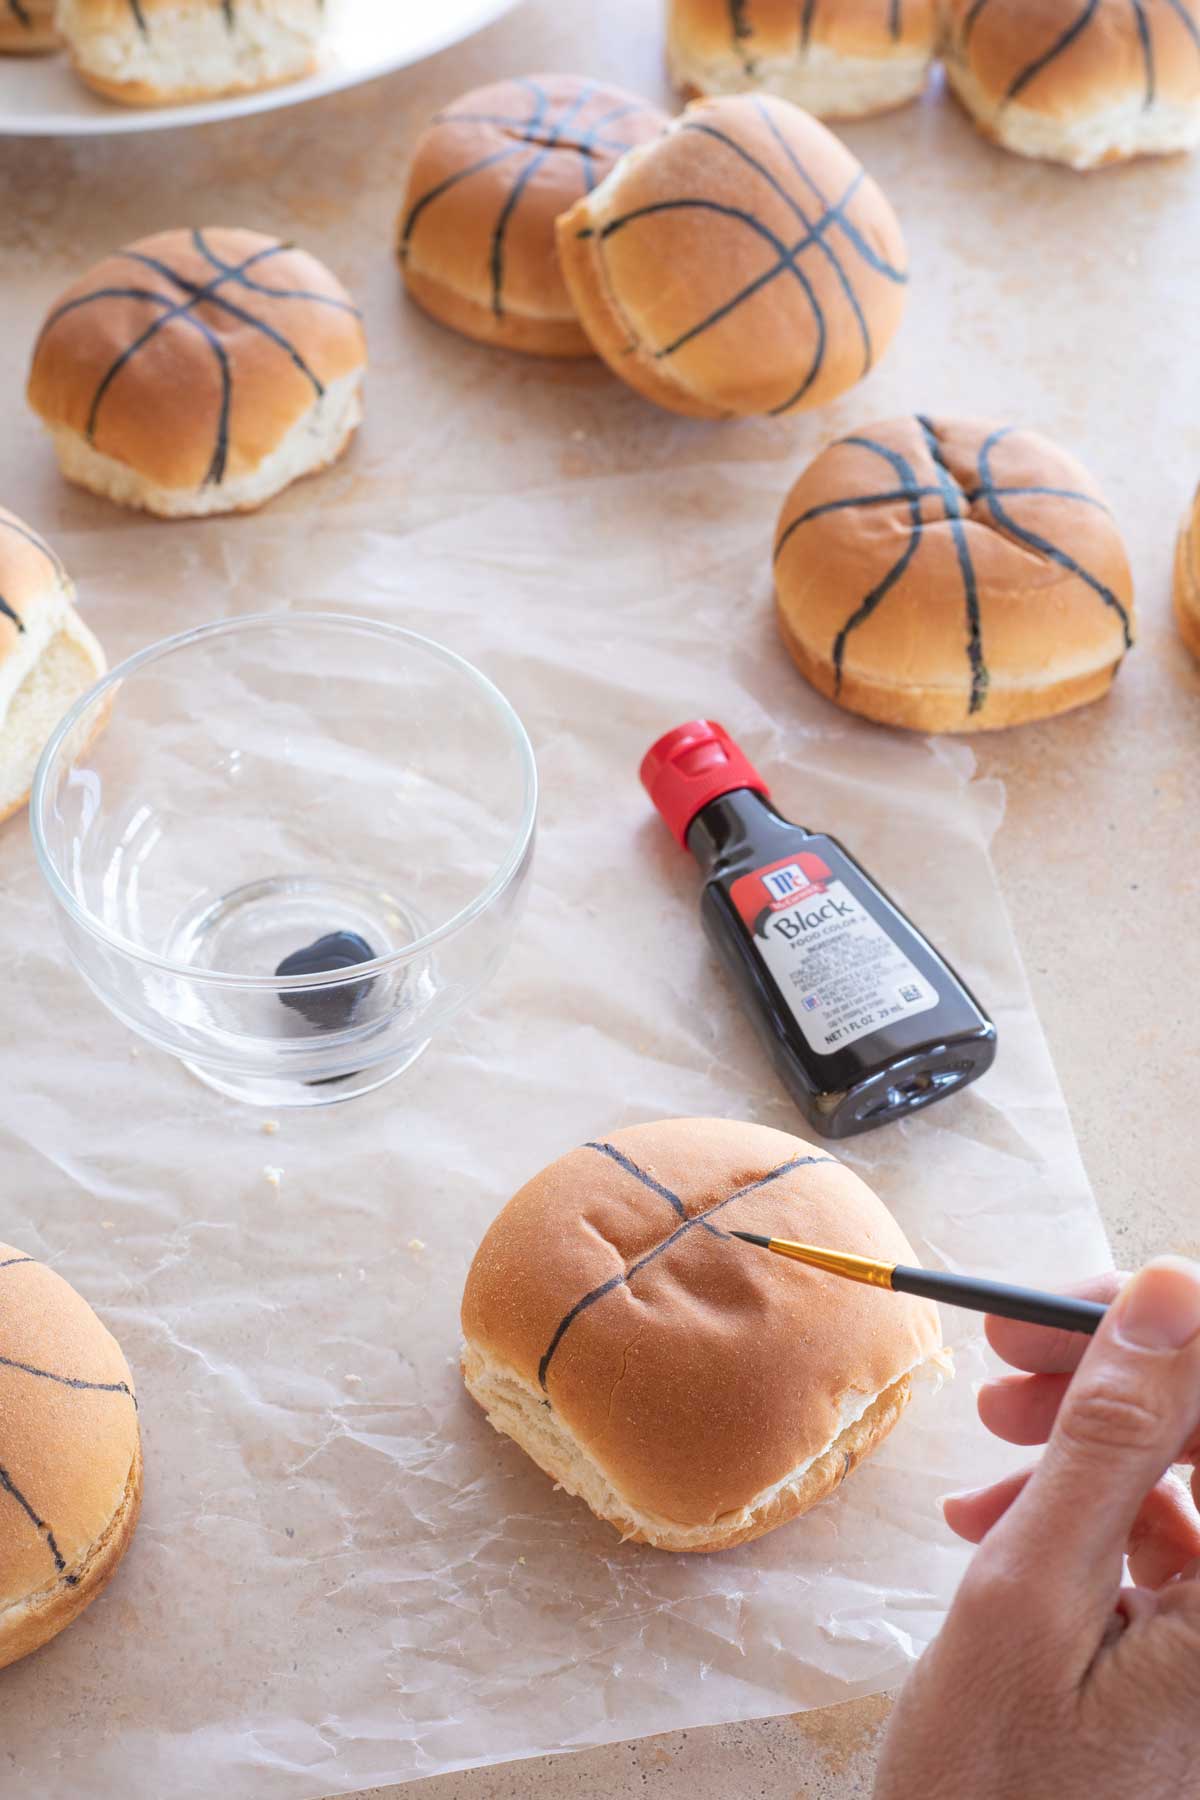 Hand using paint brush and food coloring to make a bun look like a basketball.